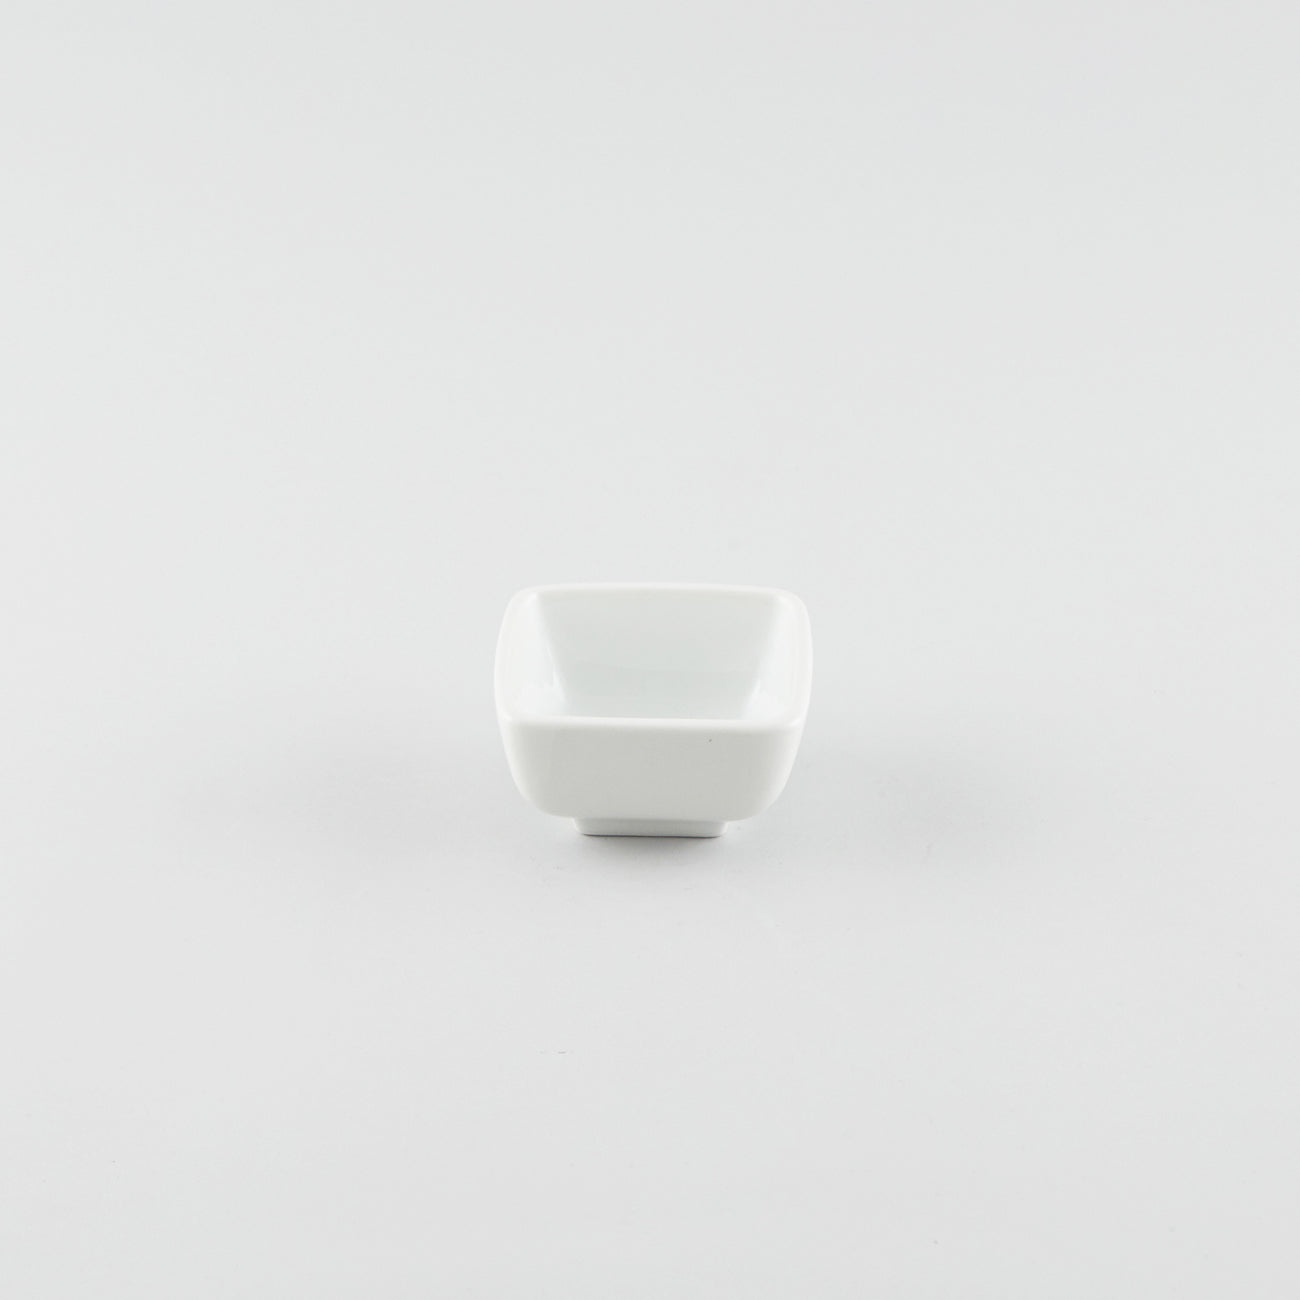 Rounded Square Bowl - White (S)